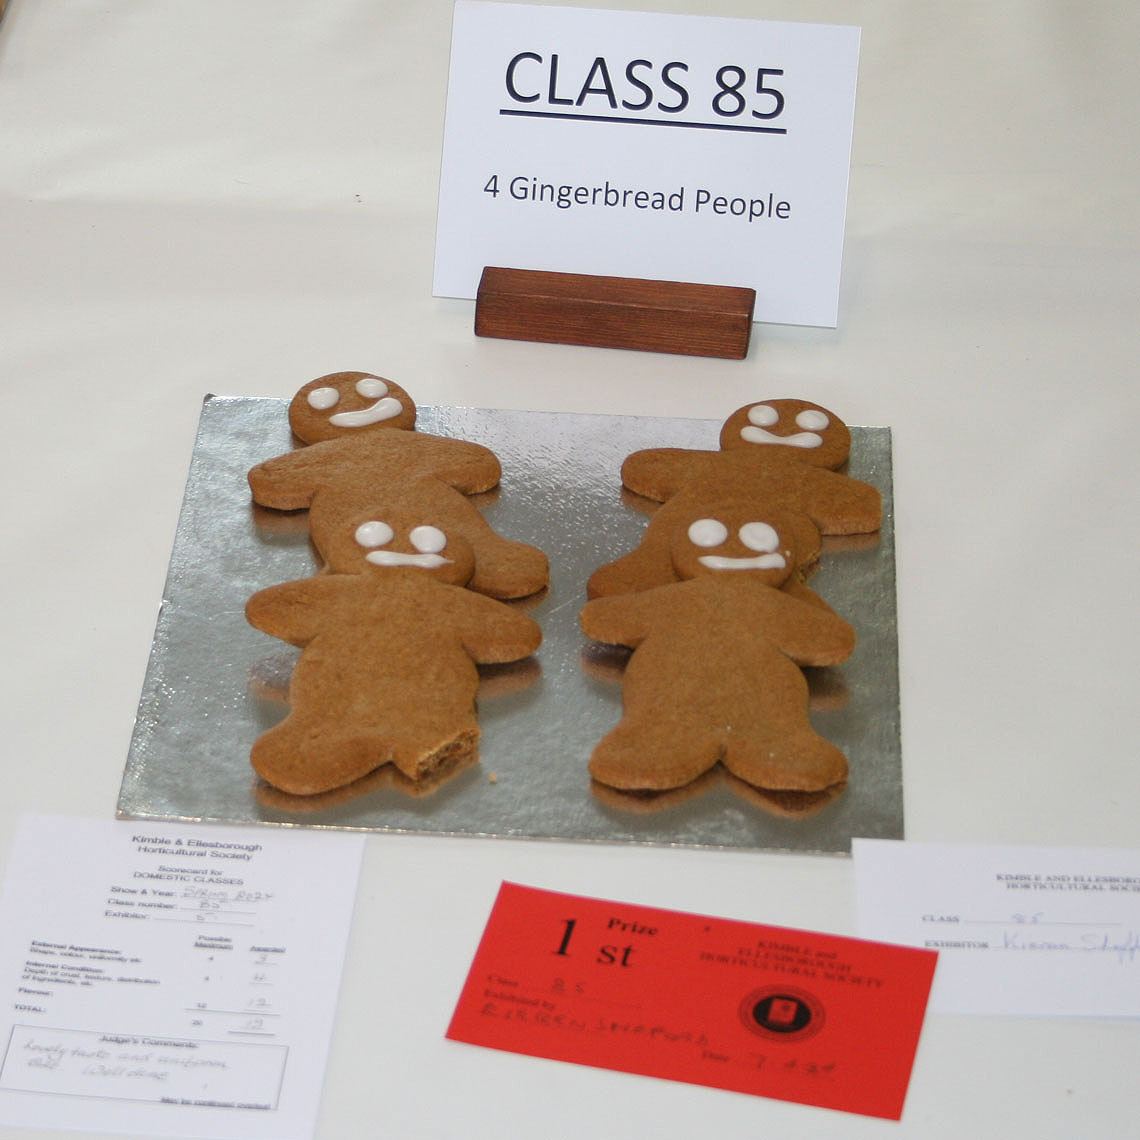 Class 85 - 4 Gingerbread People